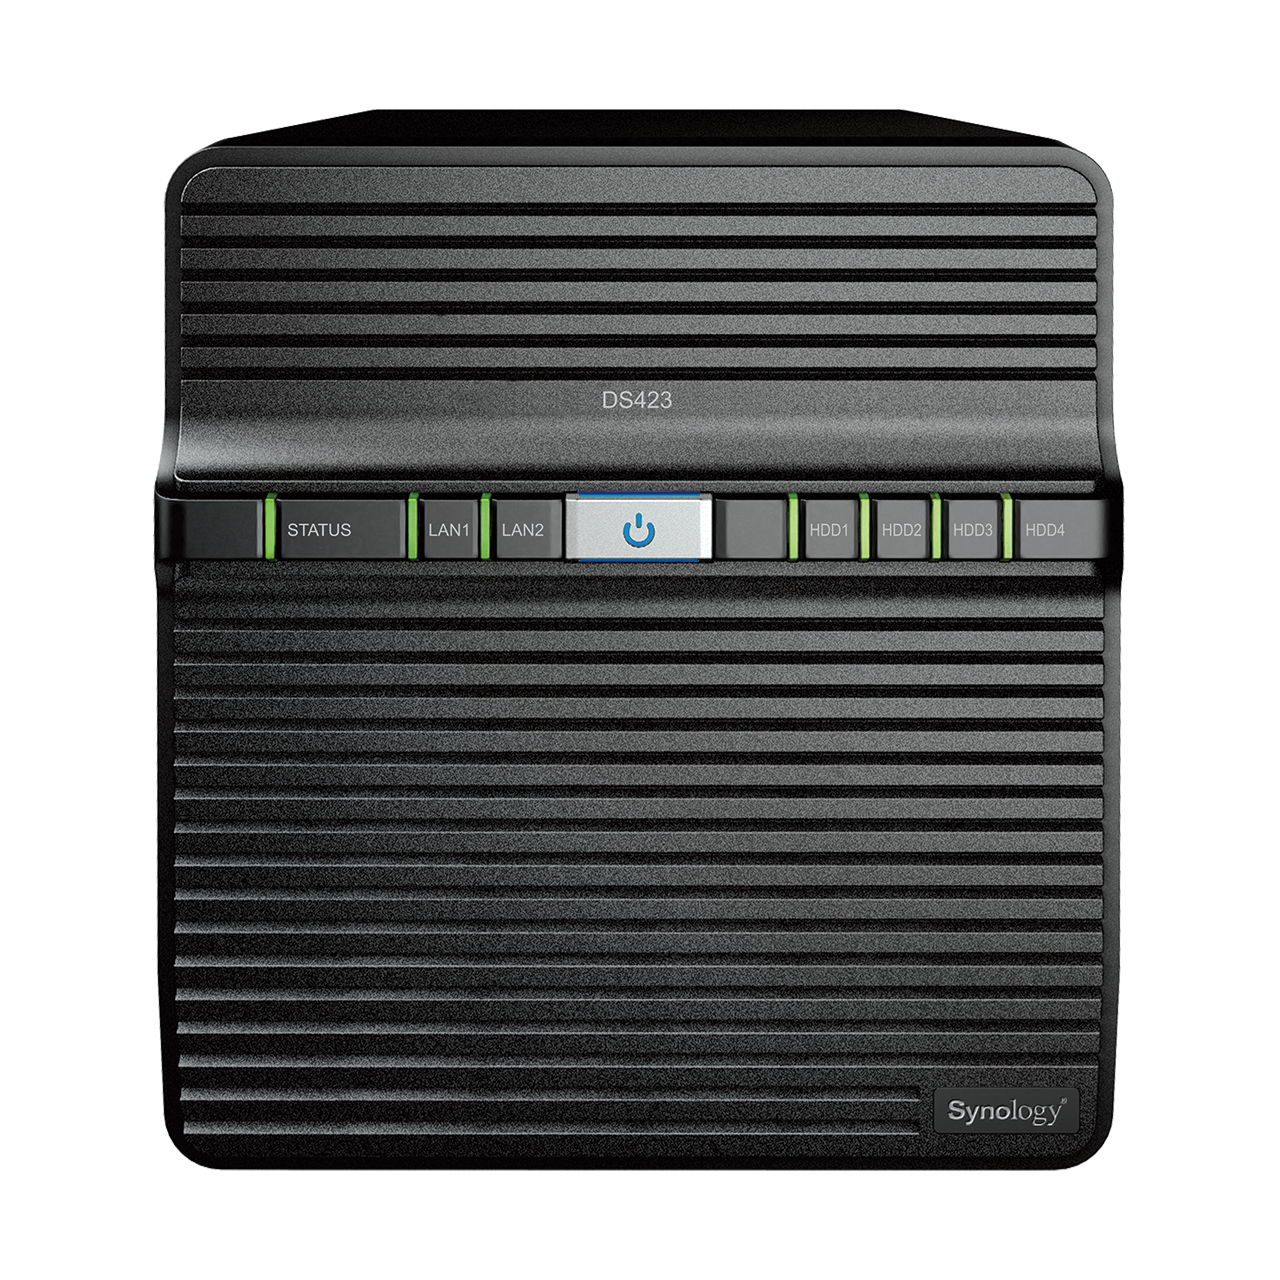 Photos - Other for Computer Synology DS423 16TB  4 bay - a Secure Sharing and Sy DS4 ( HAT3300)